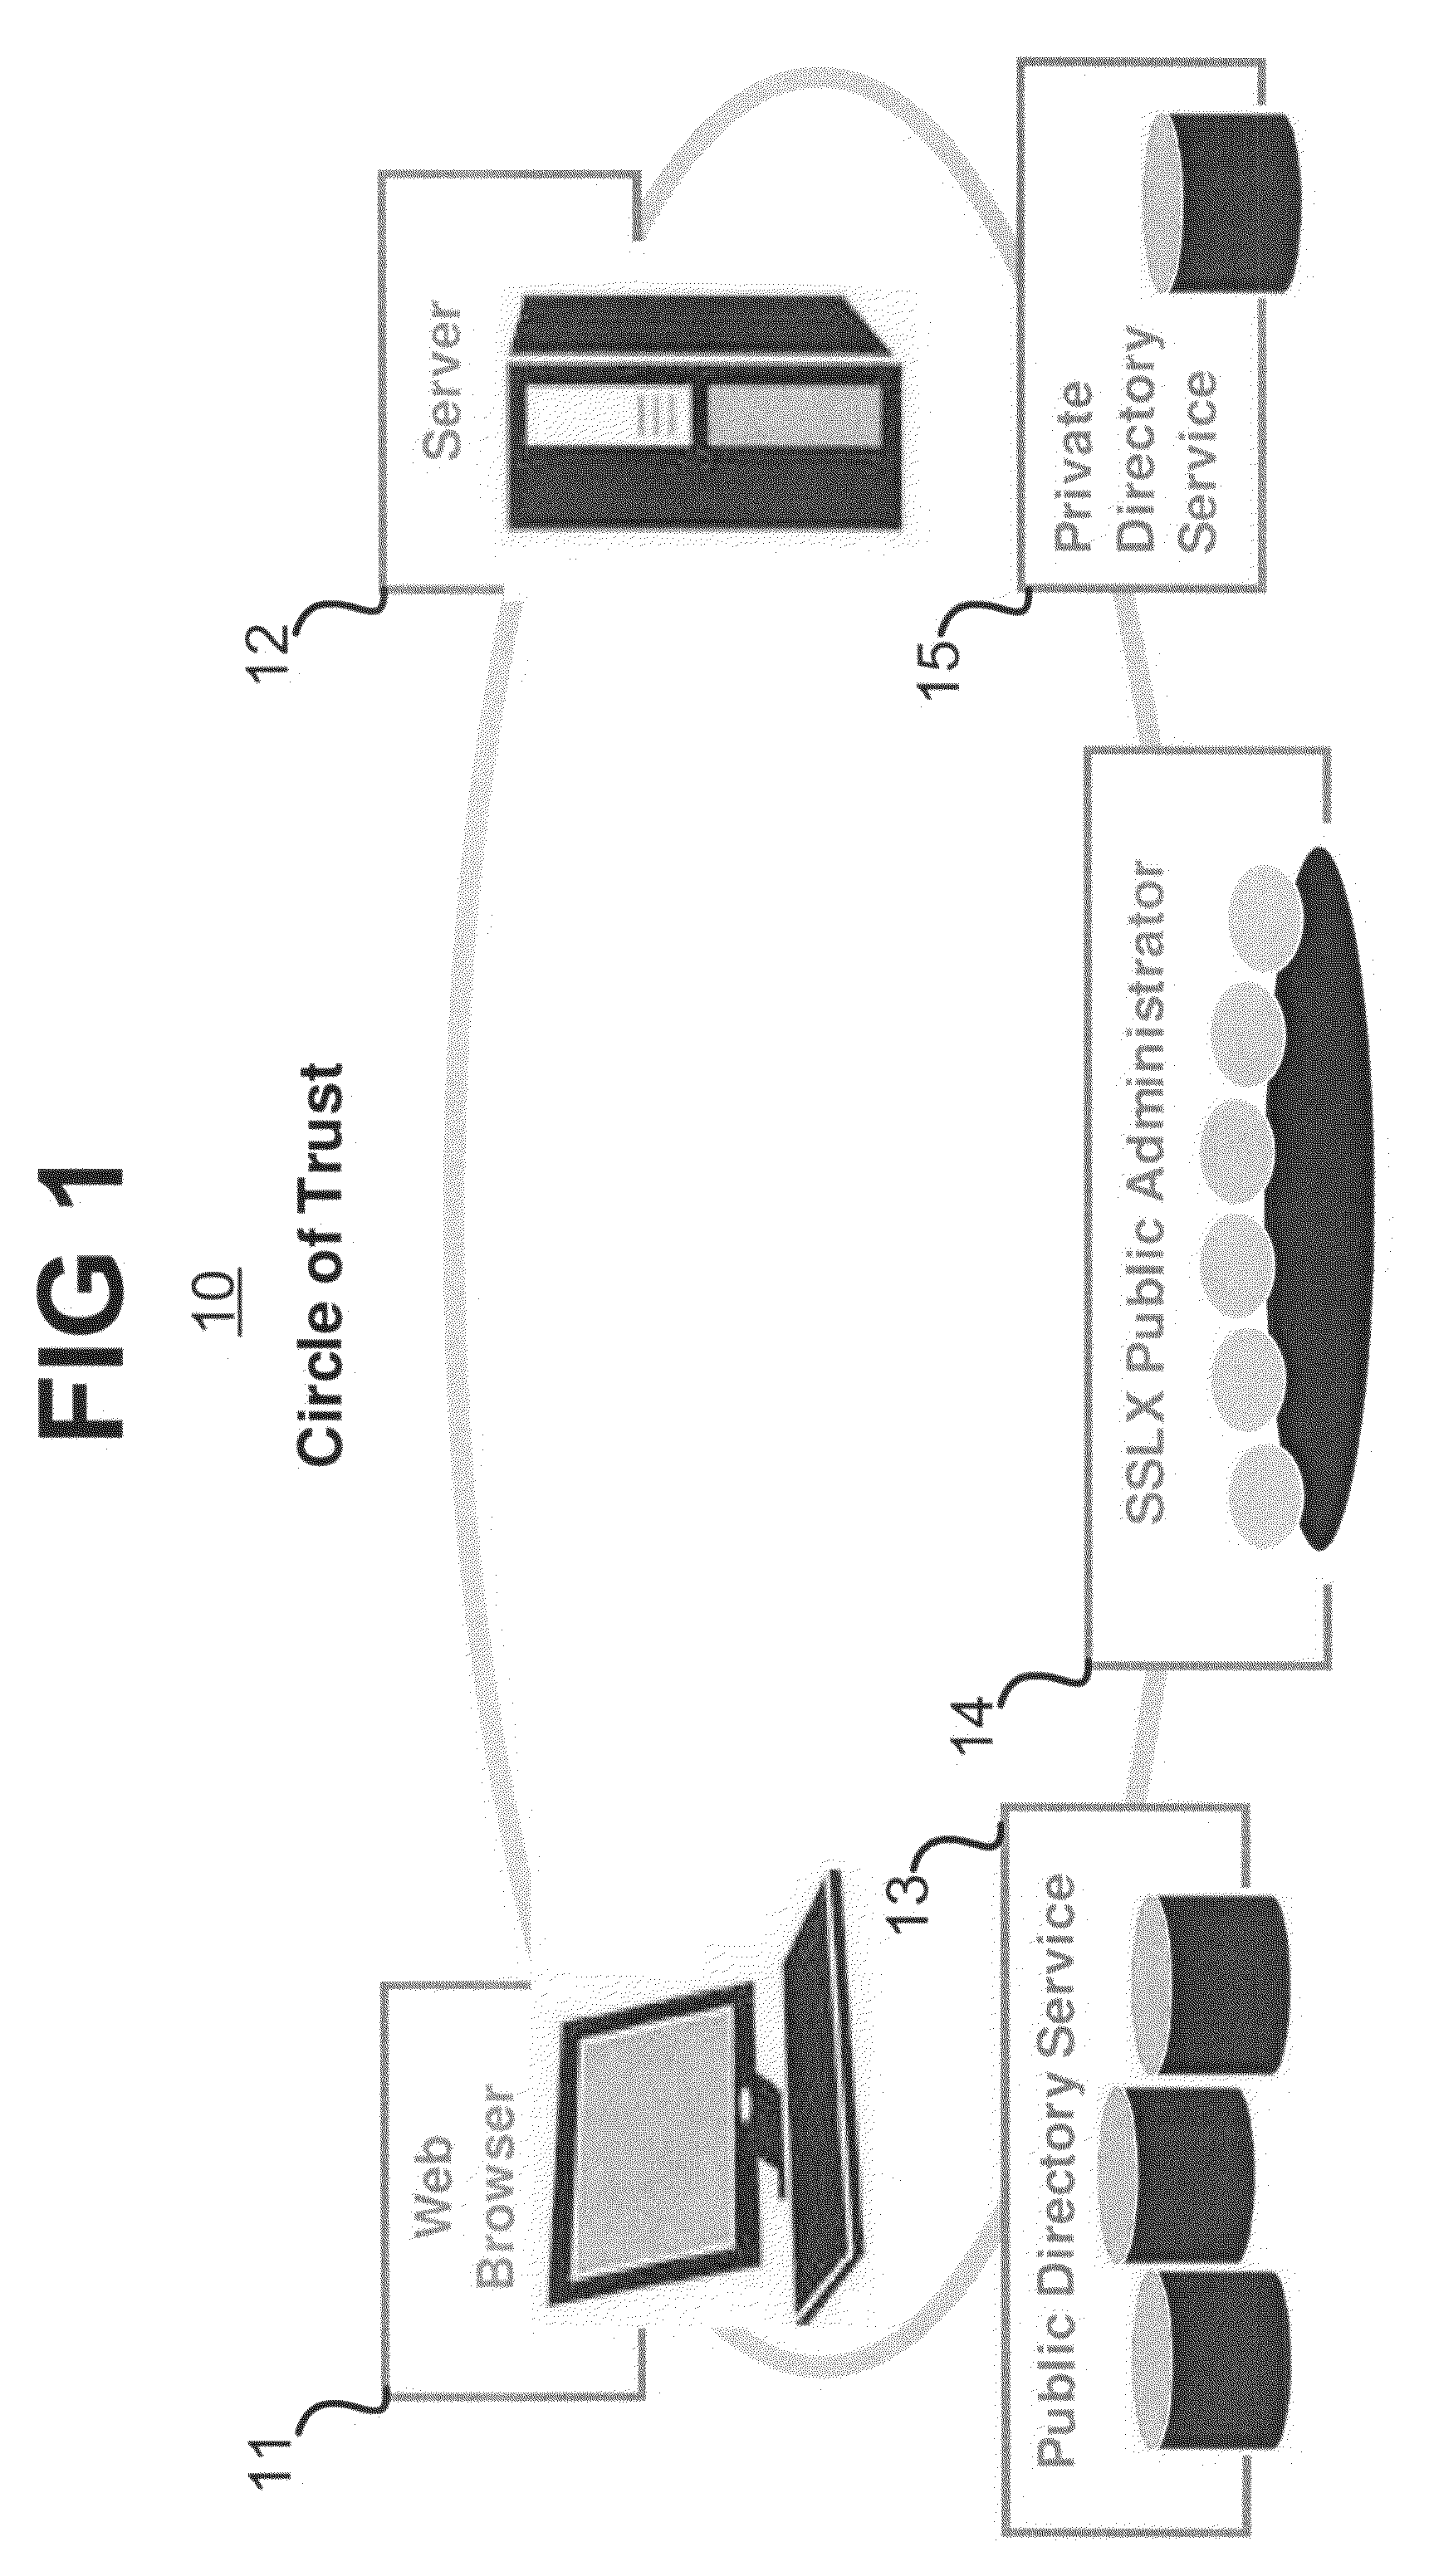 Method for obtaining key for use in secure communications over a network and apparatus for providing same